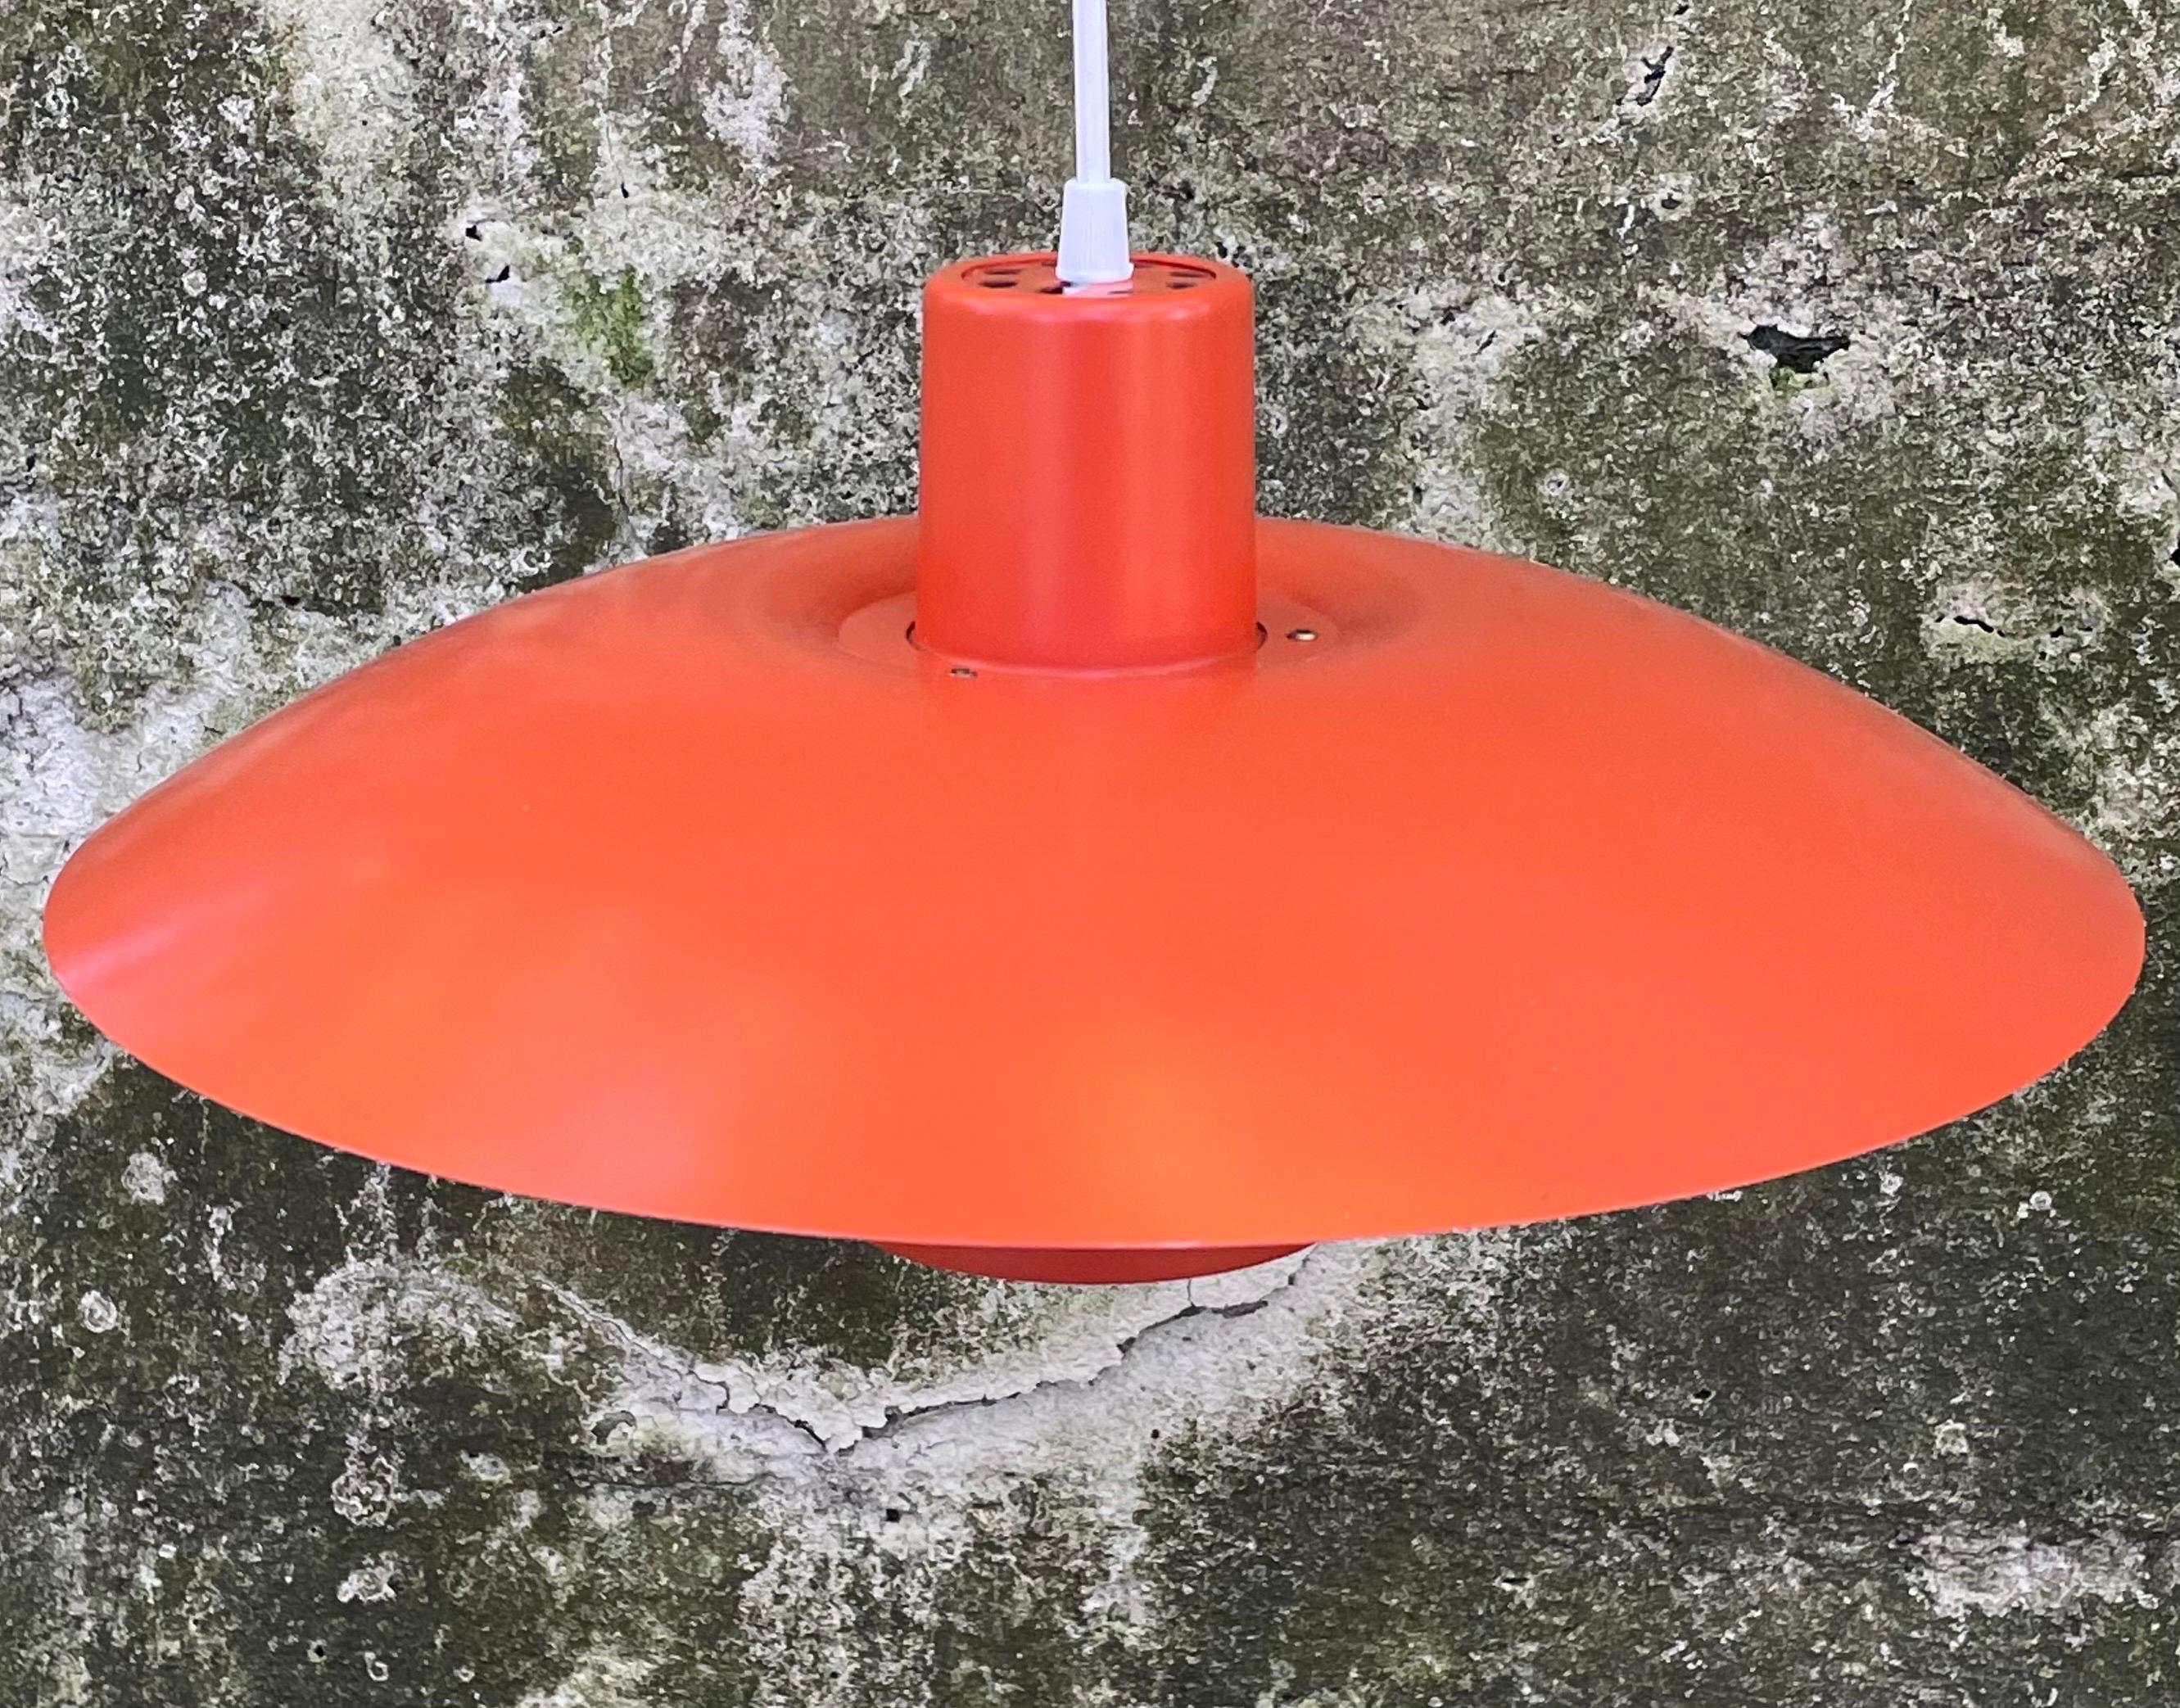 Authentic Mid Century Poul Henningsen for Louis Poulsen orange pendant light consisting of three curved shades.  Professionally rewired with approximately 8 feet of white coated wire. 